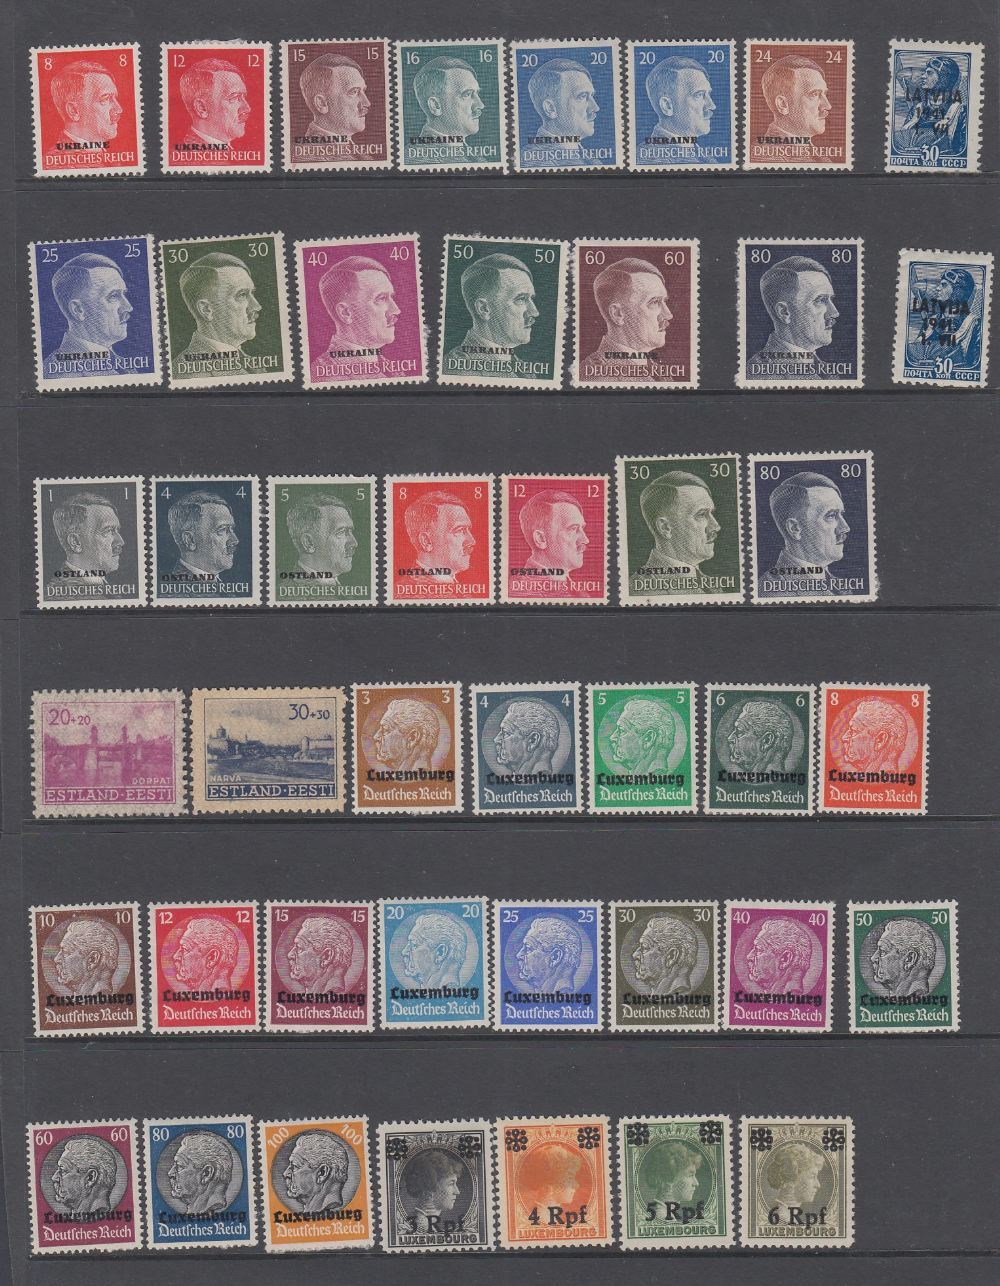 THIRD REICH STAMPS Accumulation of mint and used stamps, - Image 3 of 3